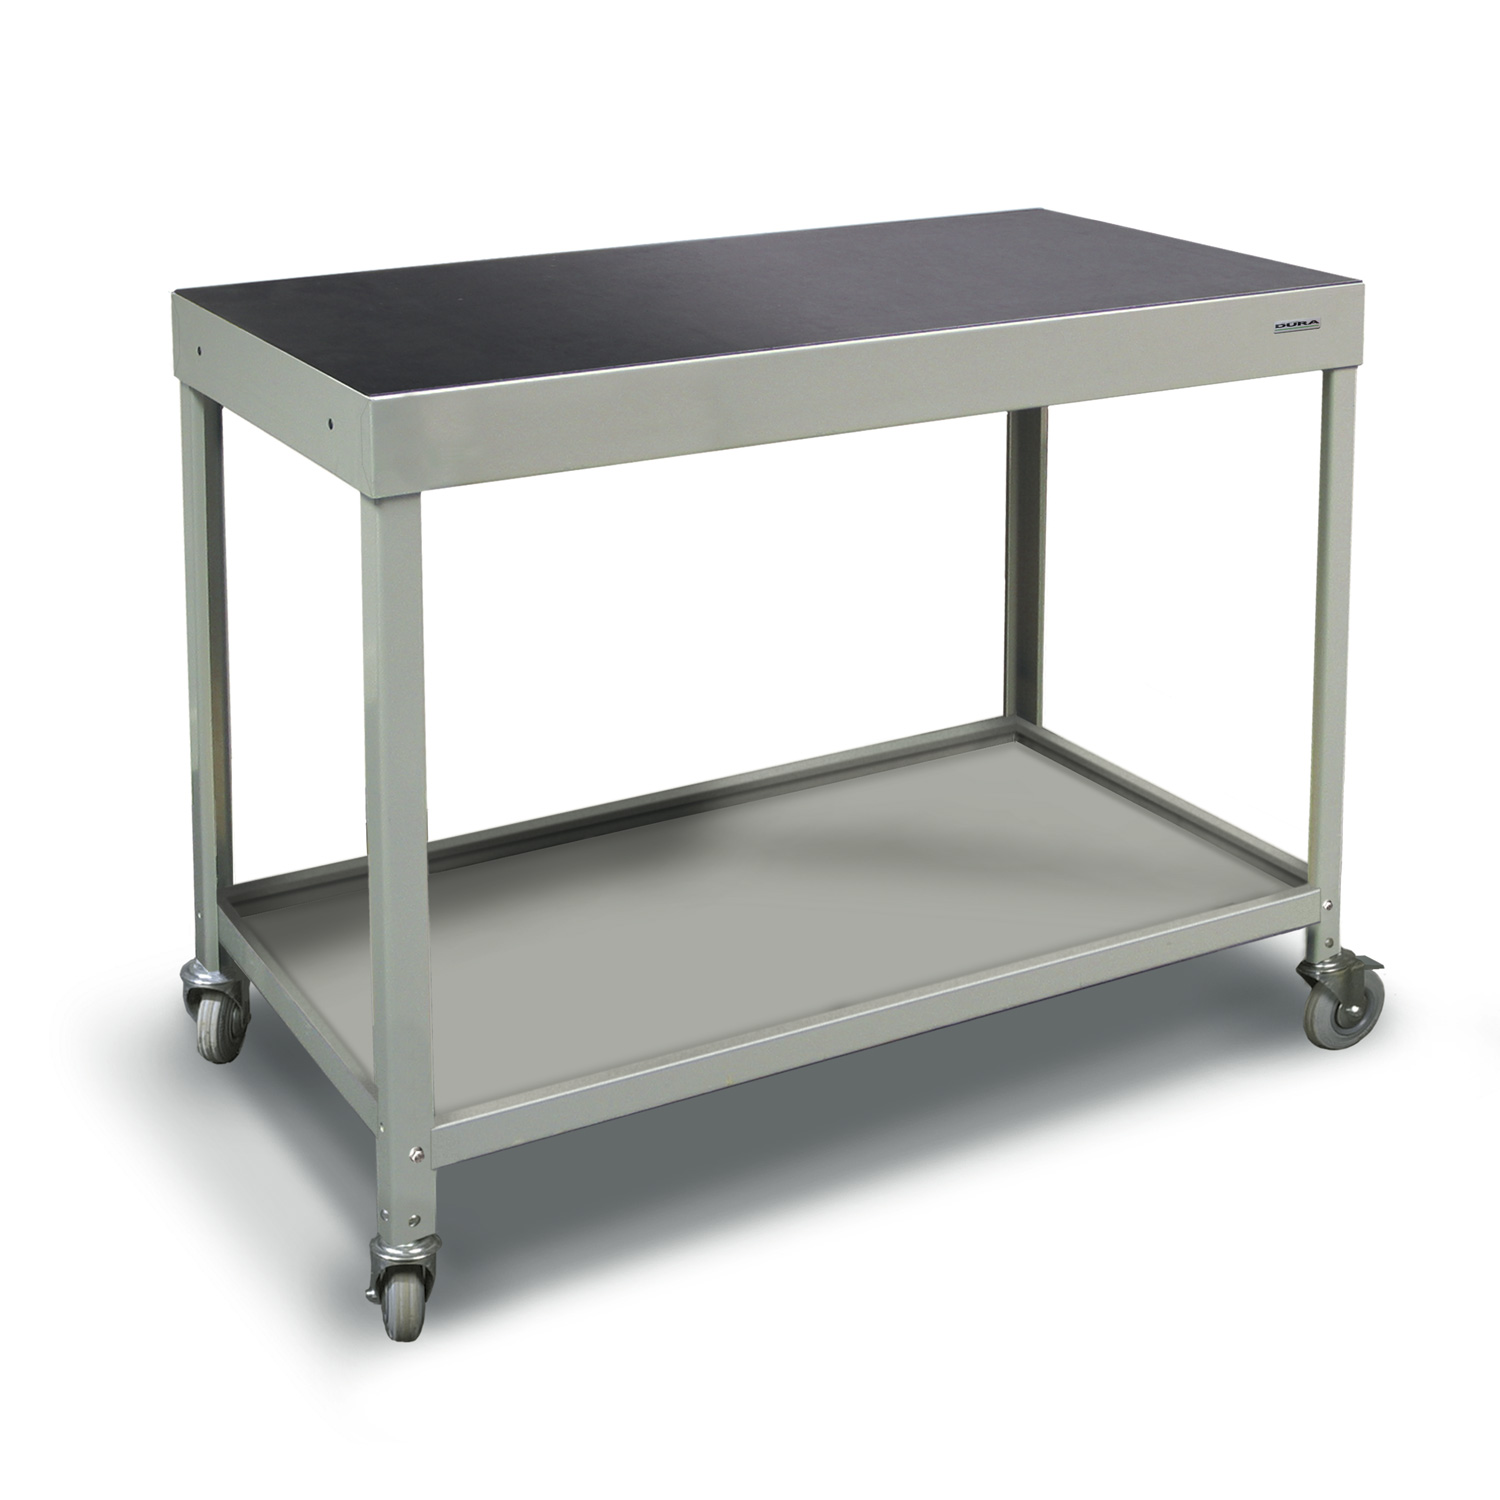 Workbench with castors (850mm high)